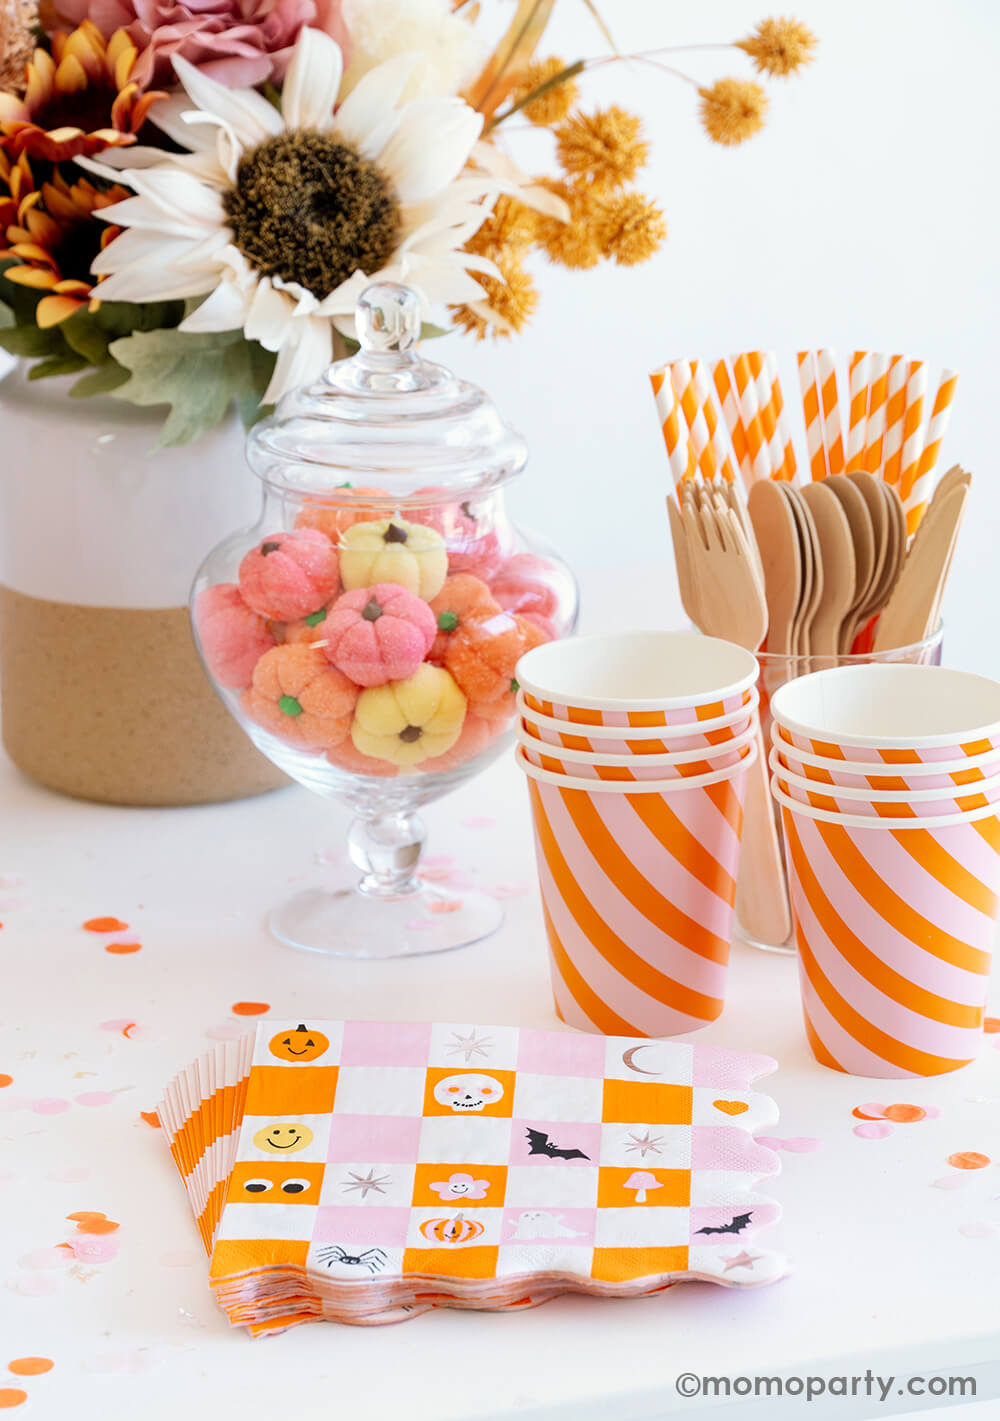 A beautiful Halloween party table featuring groovy Halloween checkered napkins with skull, pumpkin, bat, moon characters on them . Next to the napkins are some orange/pink party cups next to a candy jar filled with pumpkin marshmallow in the colors of orange, pink and light yellow. In the back is a fall flower arrangement that set an autumn theme for a halloween party.